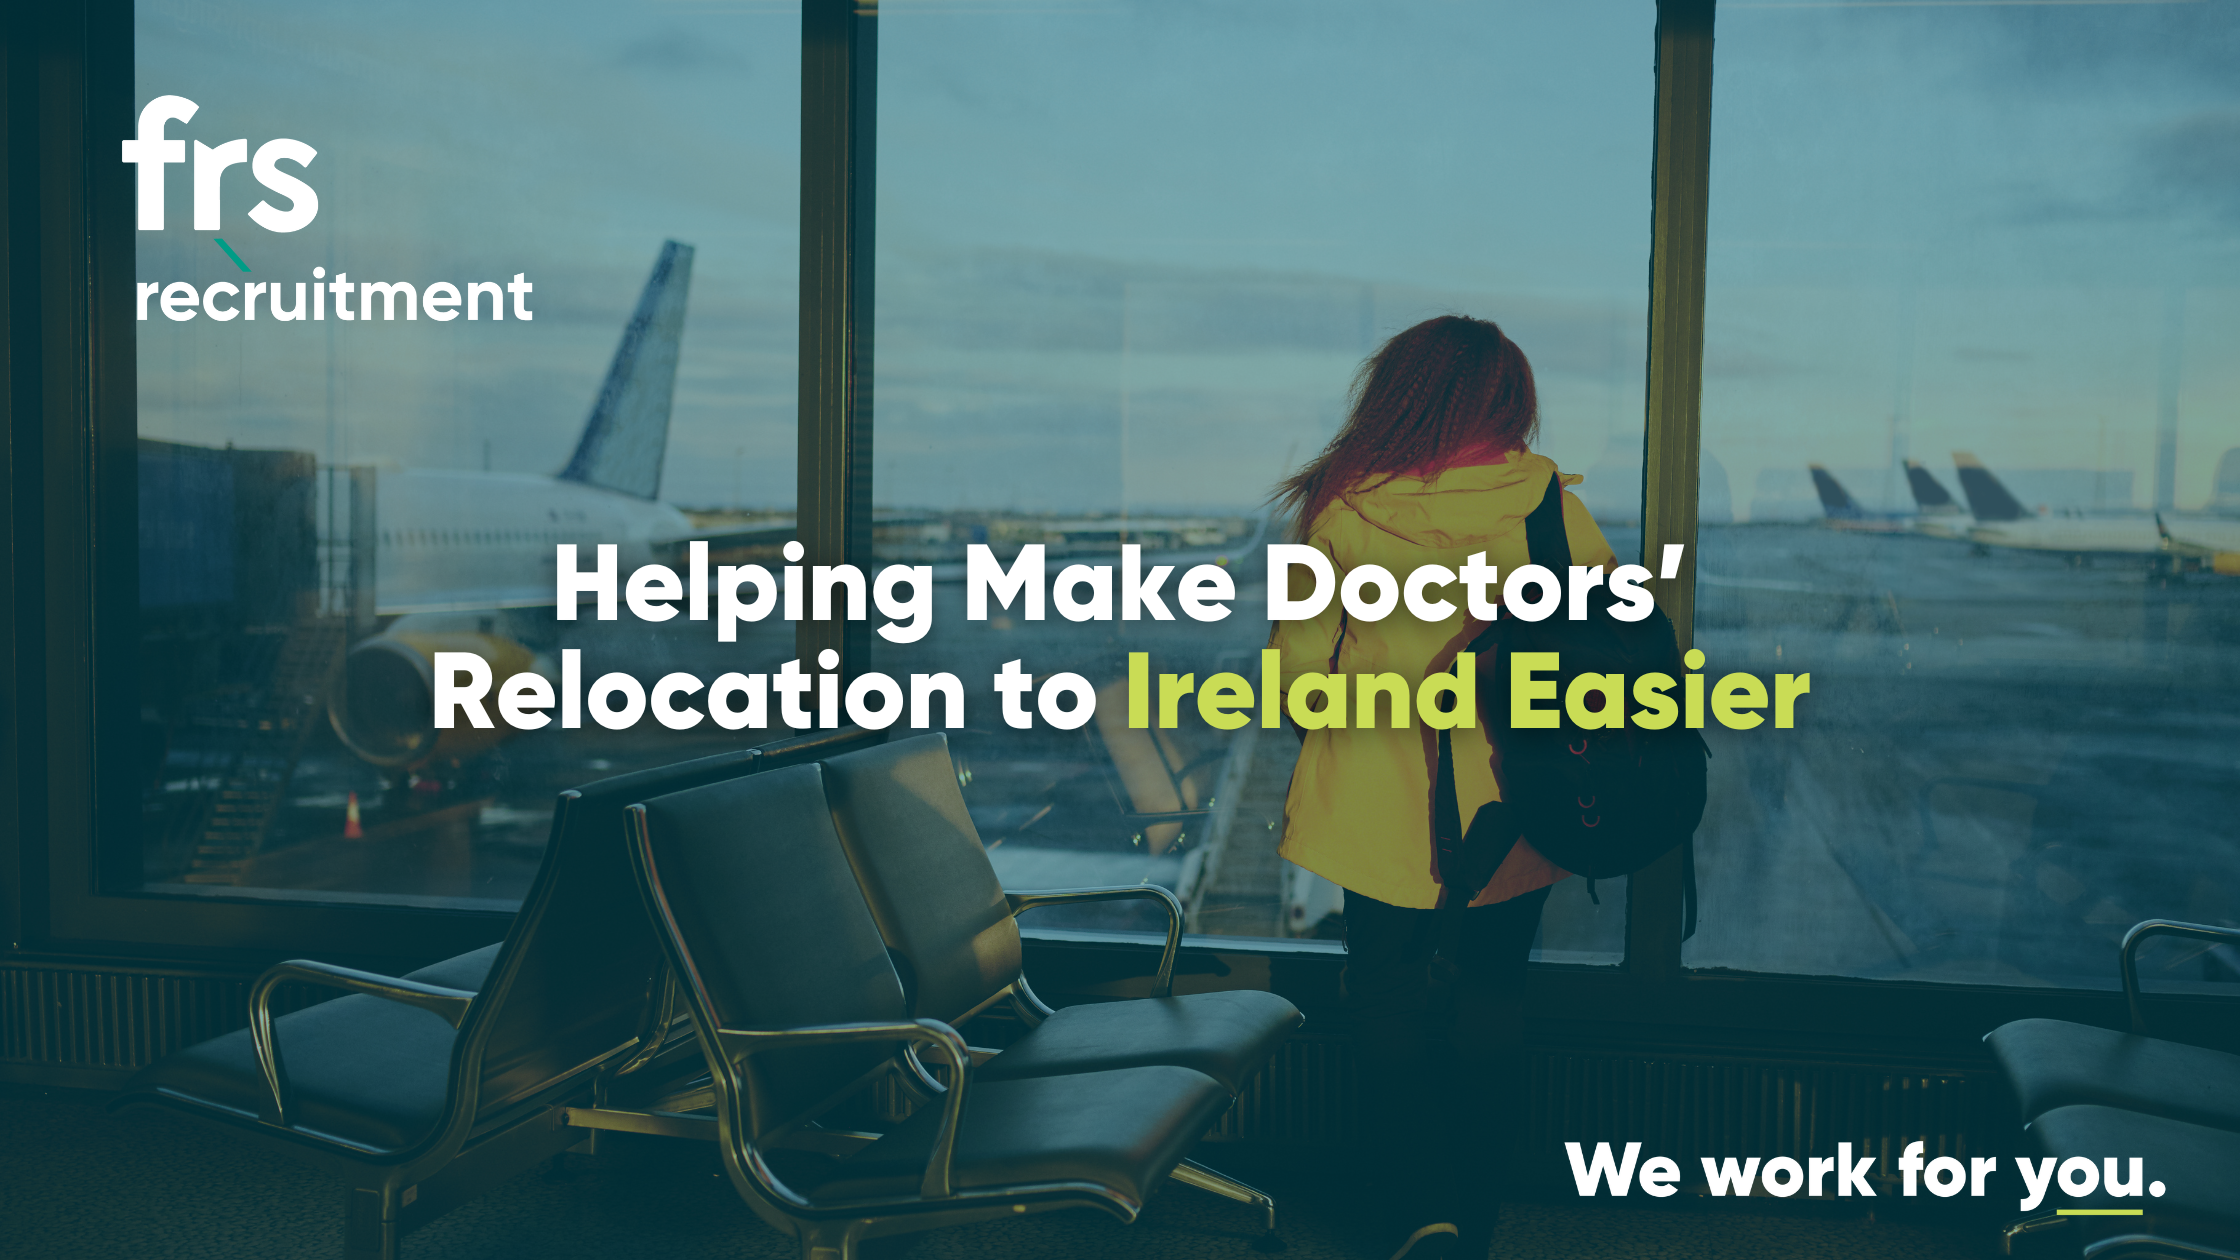 FRS Recruitment – Helping make Doctors’ relocation to Ireland easier